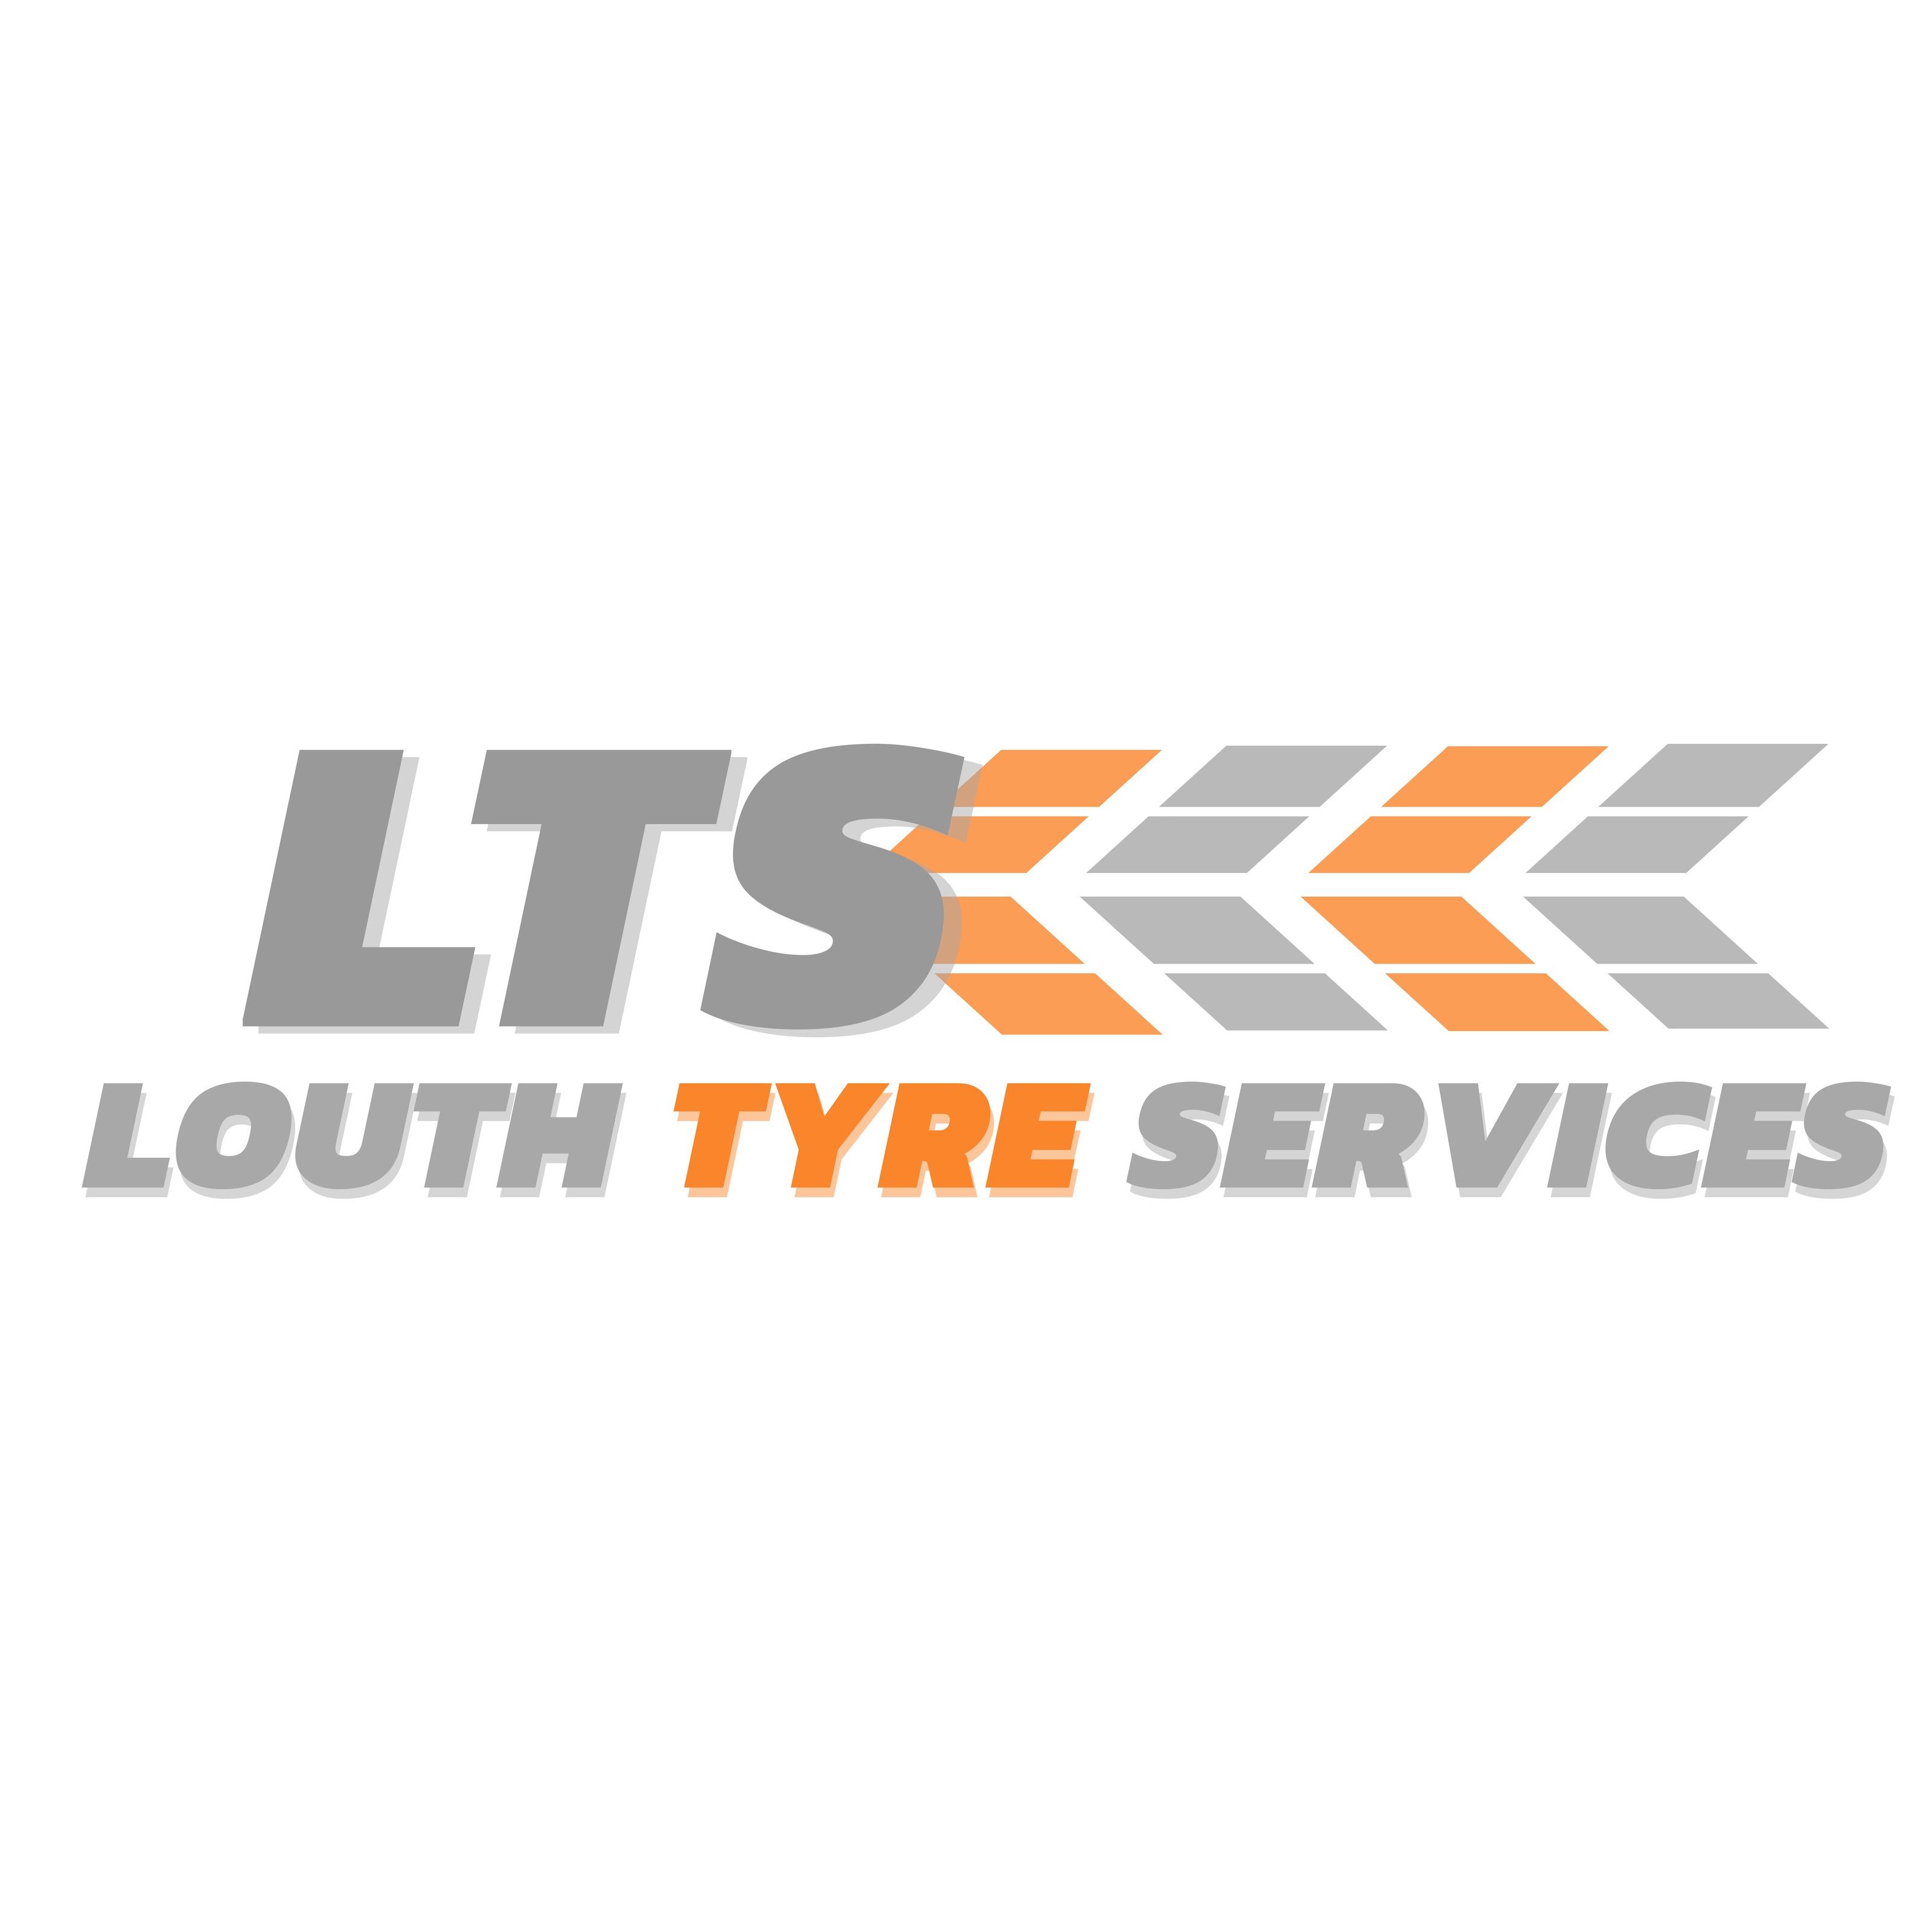 Louth Tyre Services Ltd - Louth, Lincolnshire LN11 0UZ - 01507 355715 | ShowMeLocal.com